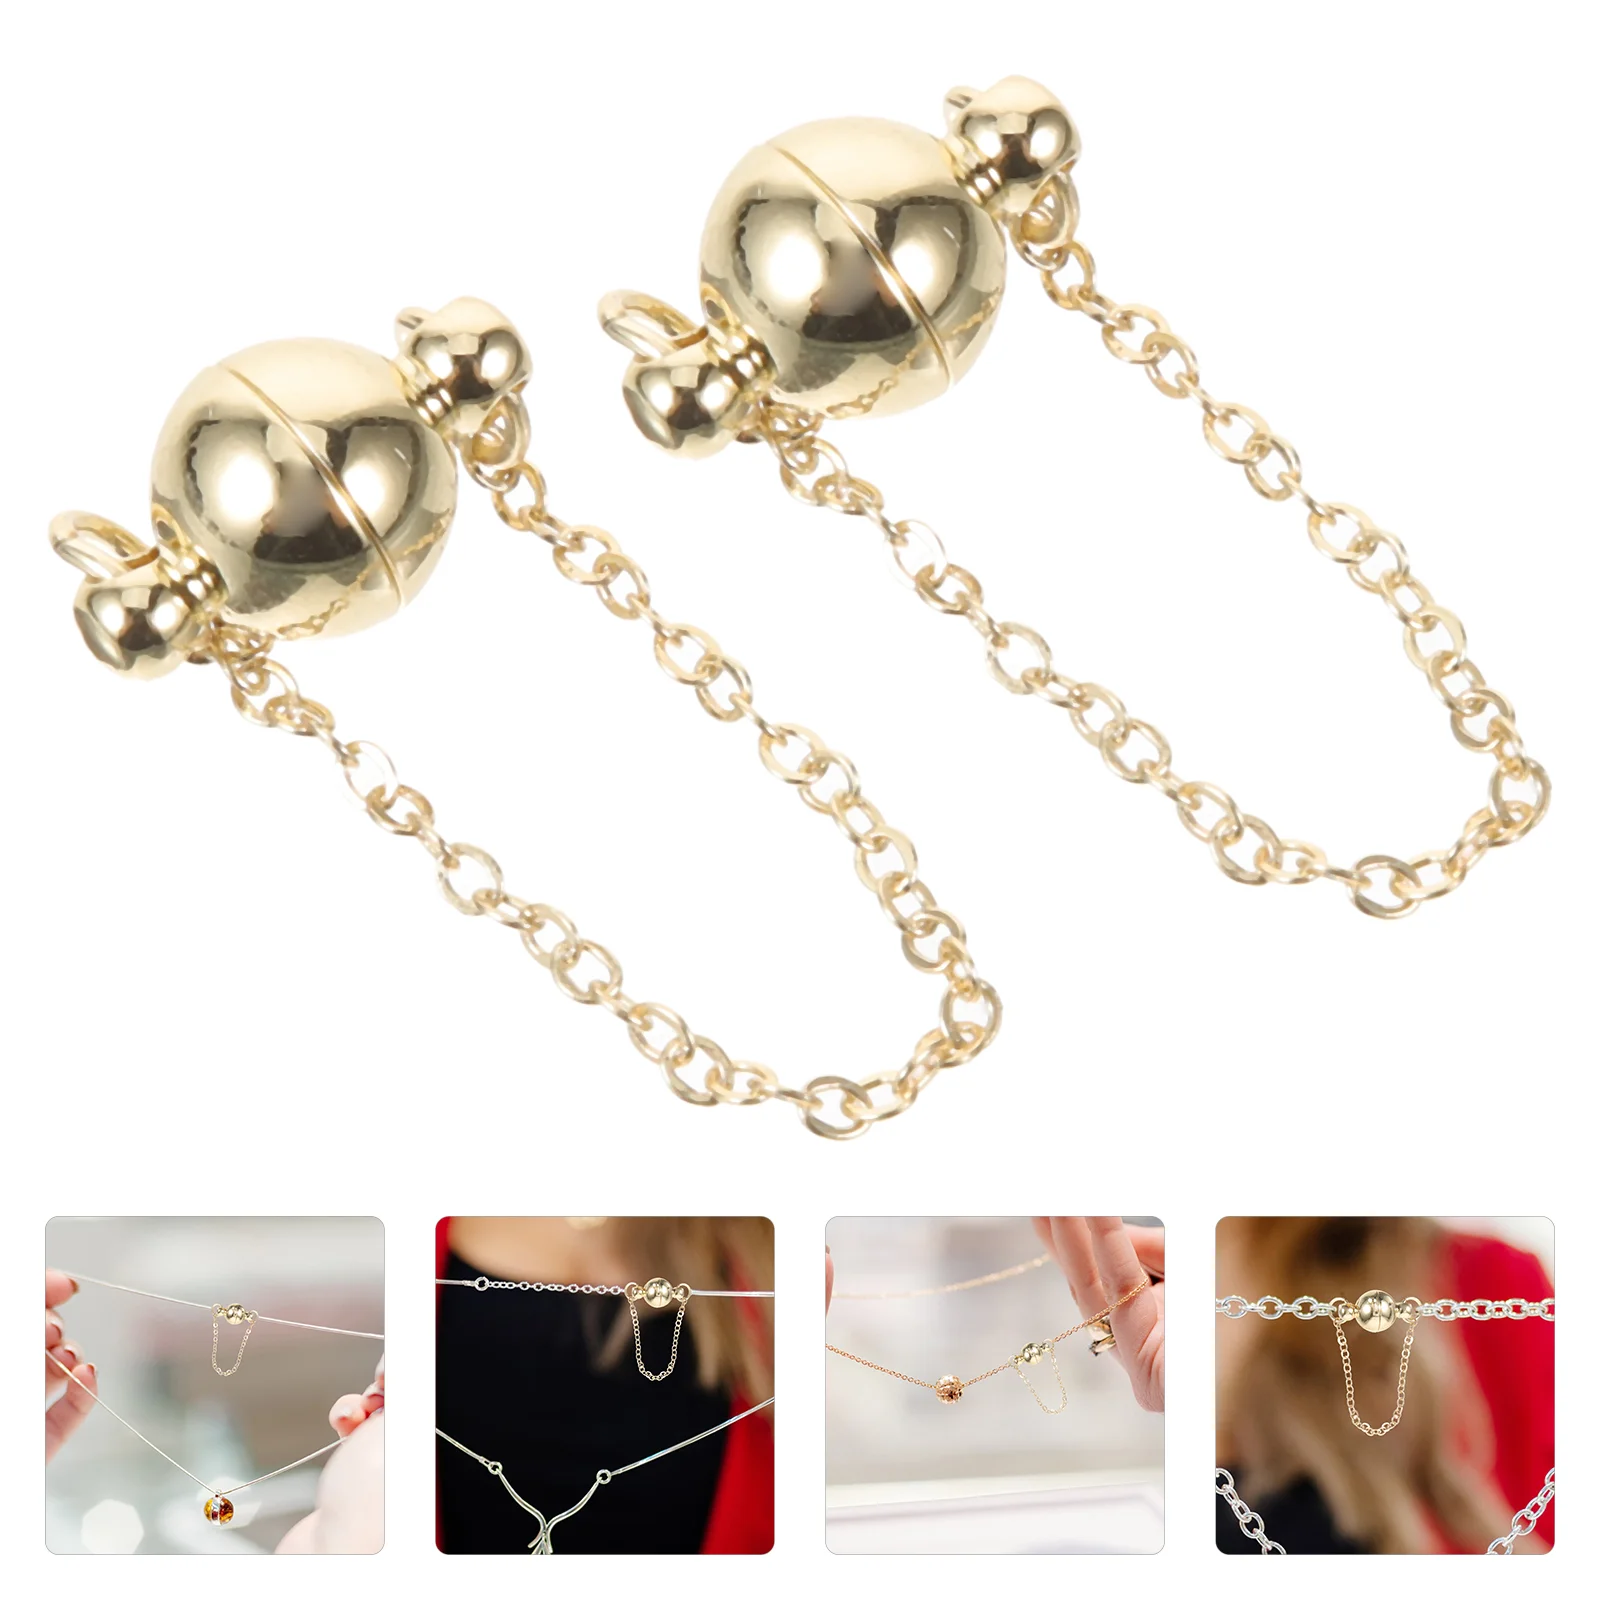 2 Pcs Necklace Clasp Jewelry Claspss Connector Accessories